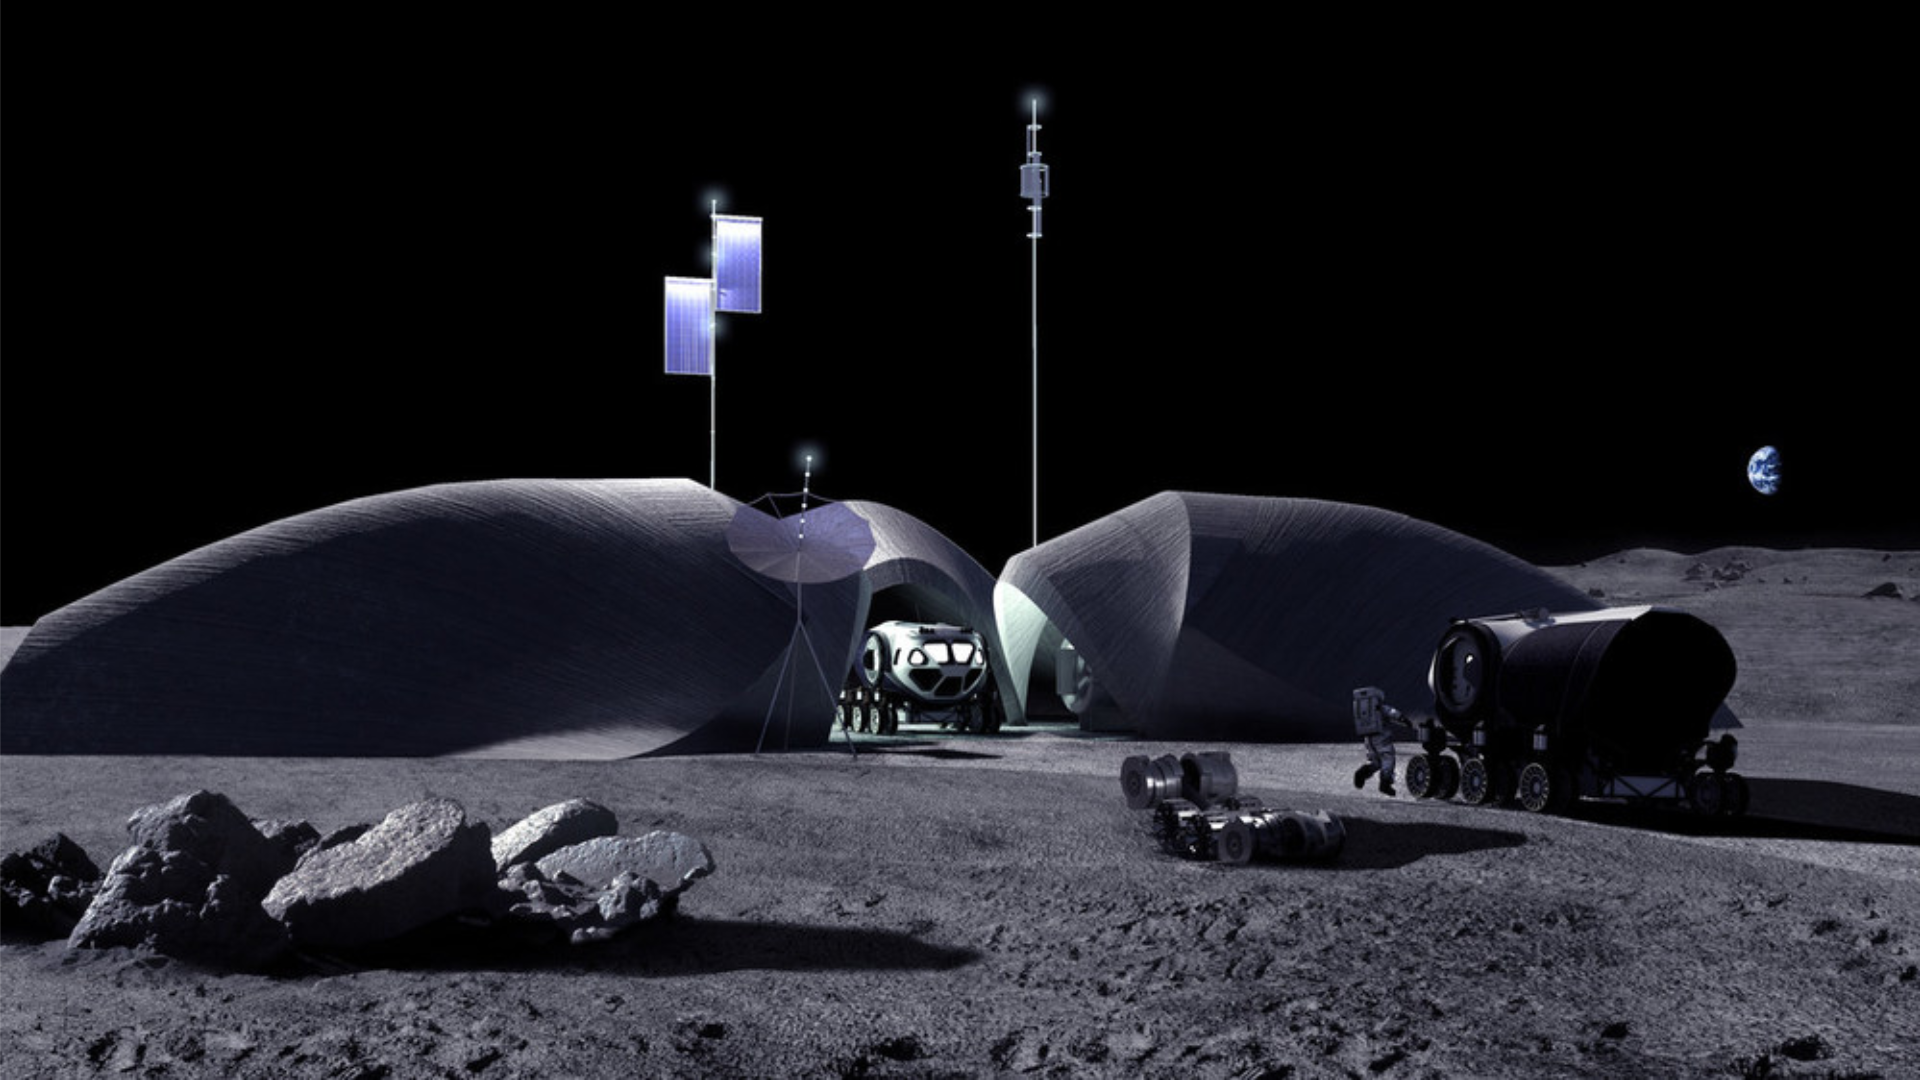 AI SpaceFactory announced its designs for LINA, the first lunar outpost developed in collaboration with NASA Kennedy Space Center engineers and planetary scientists.